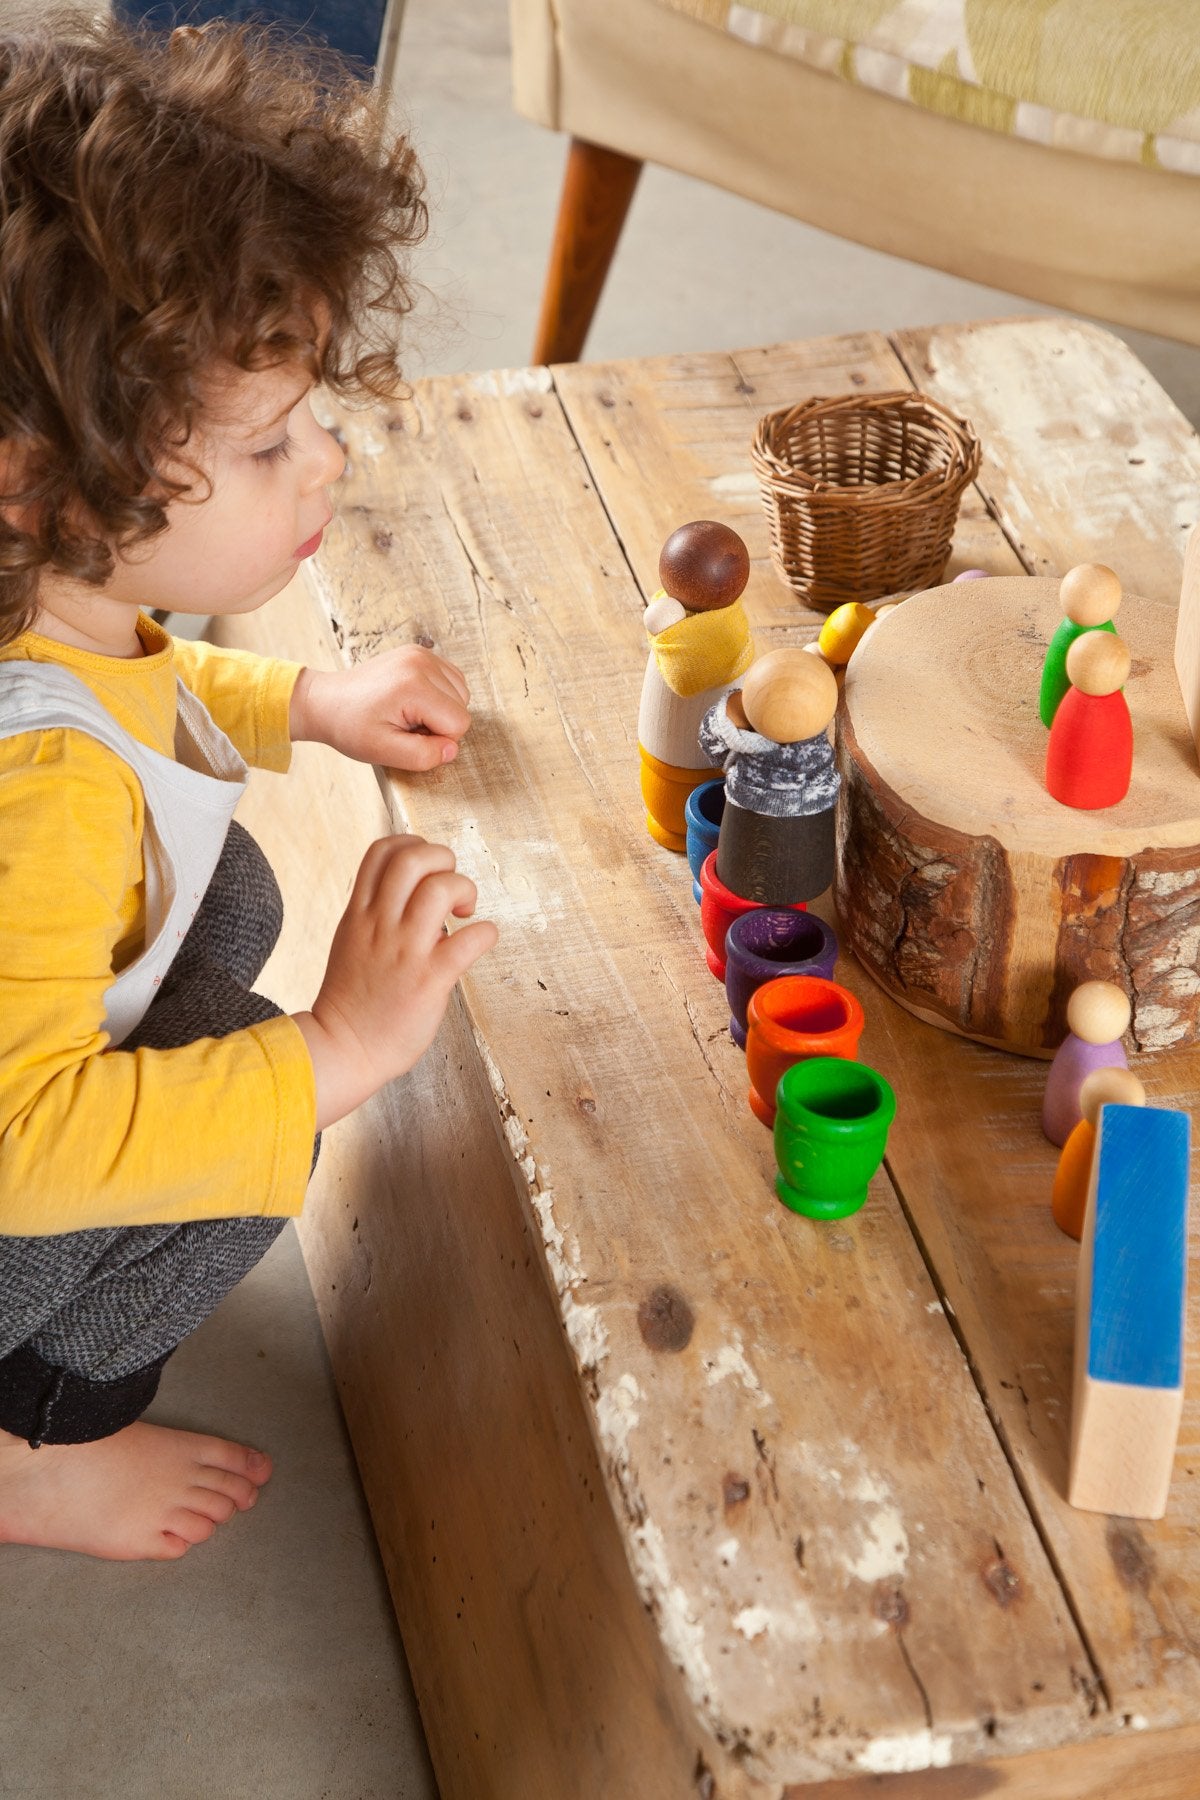 A child playing with colorful wooden peg people and rainbow wooden cups on a wood table